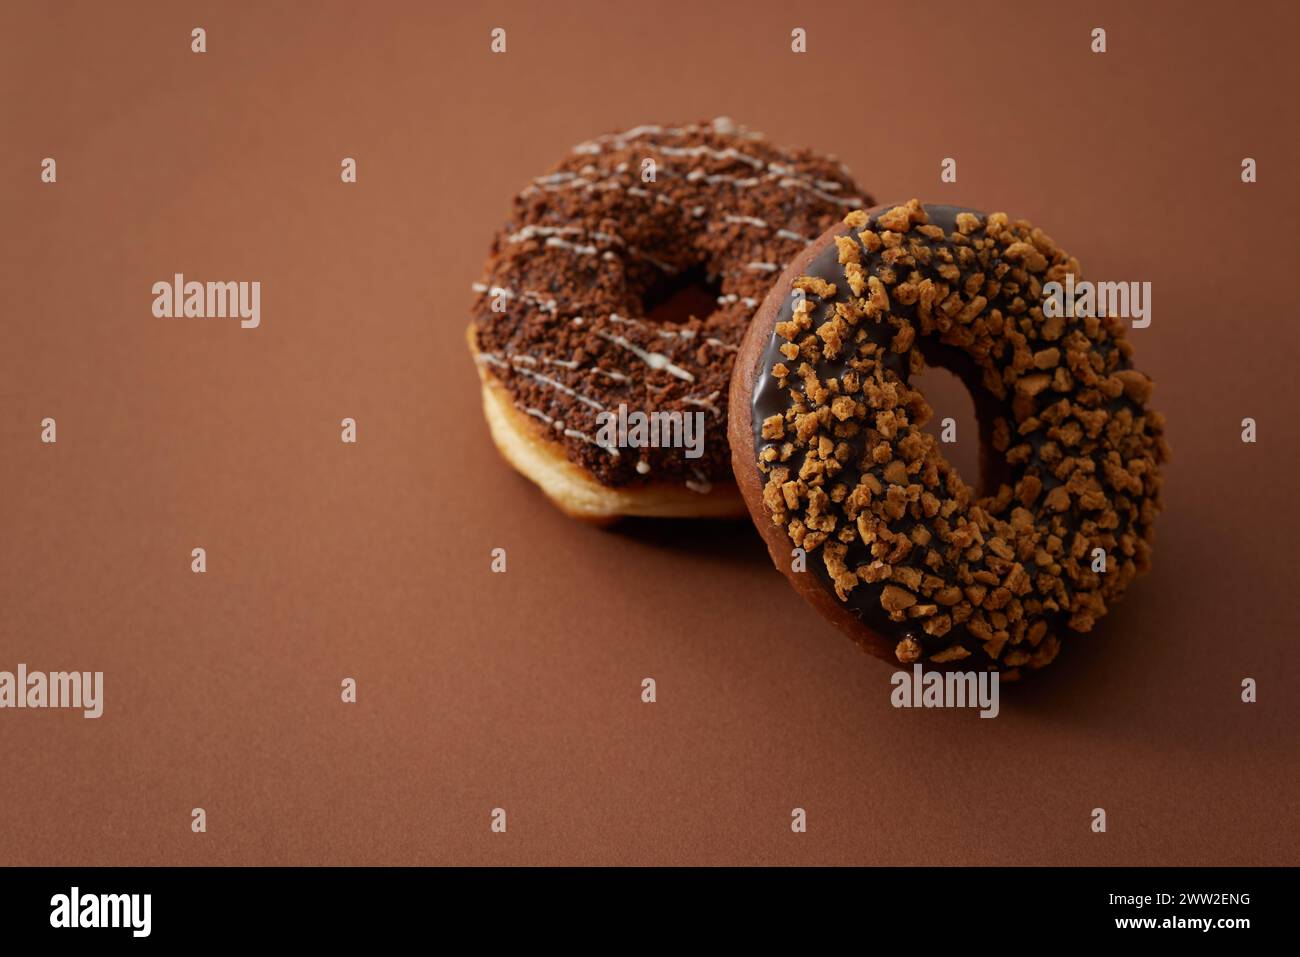 Two donuts on a brown surface Stock Photo